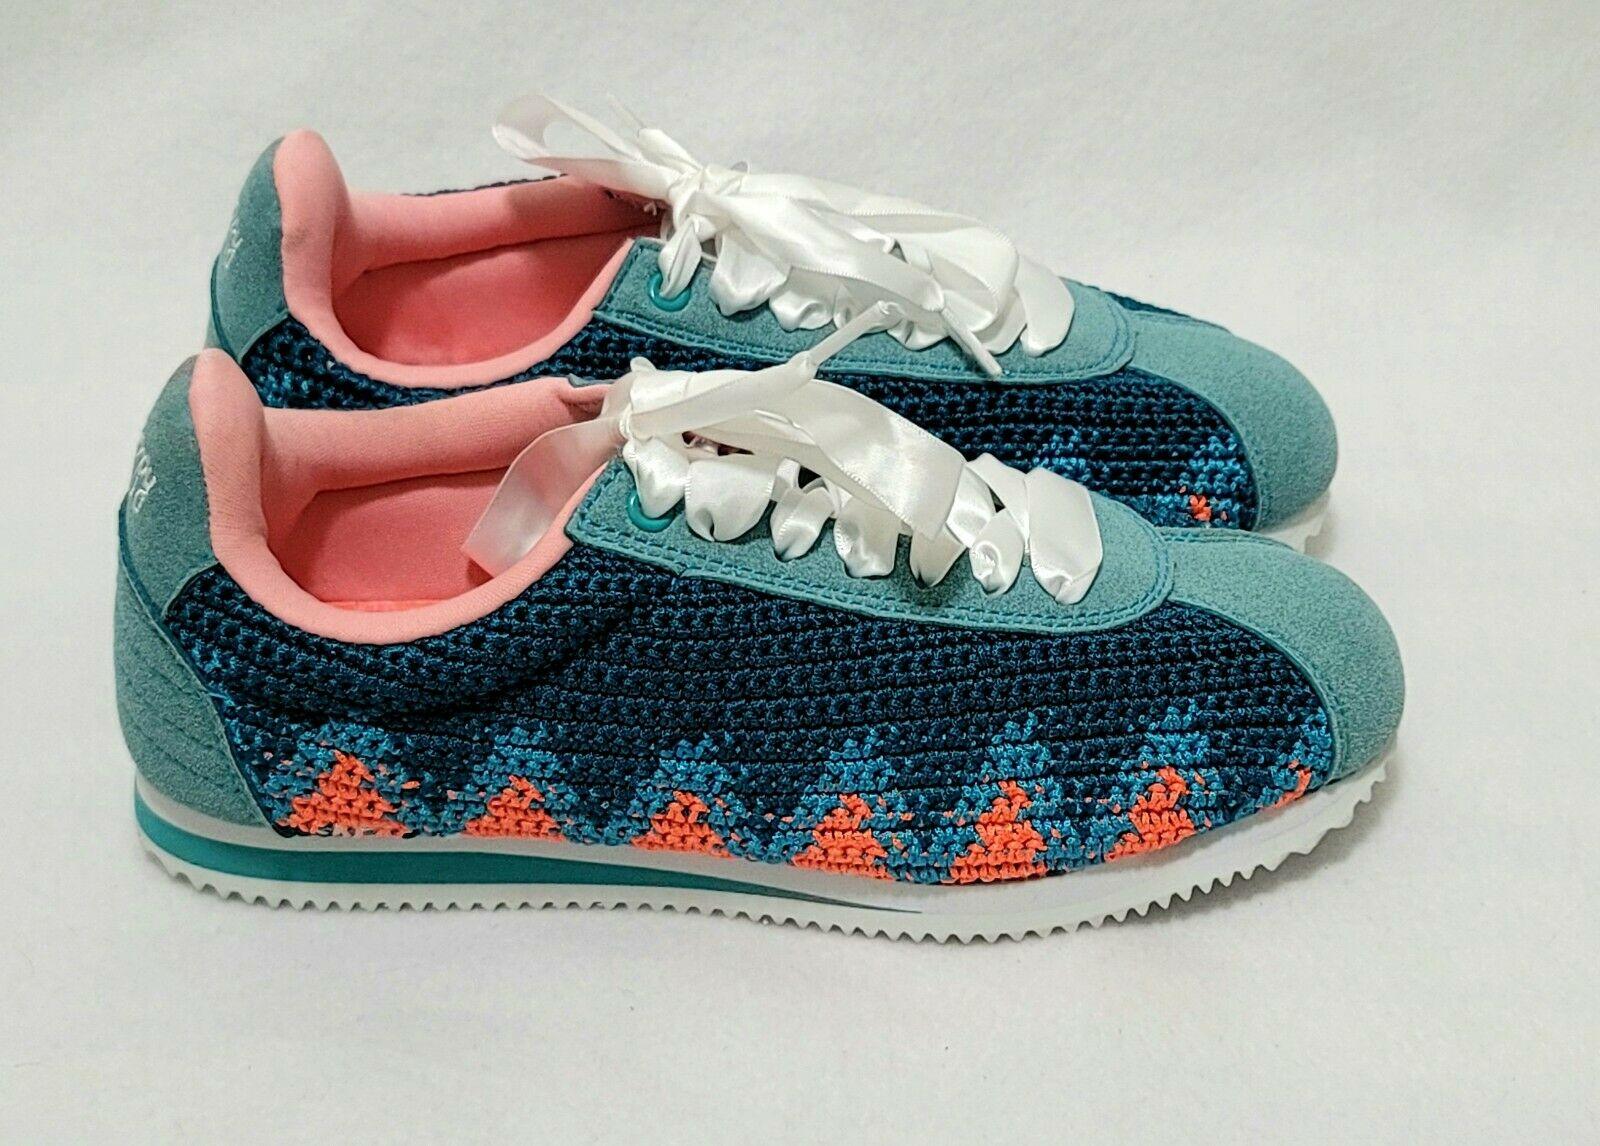 Poppy Hand-Crochet Sneakers Summer Shoes Running Style Lace-Up  Woman’s 8 - SVNYFancy